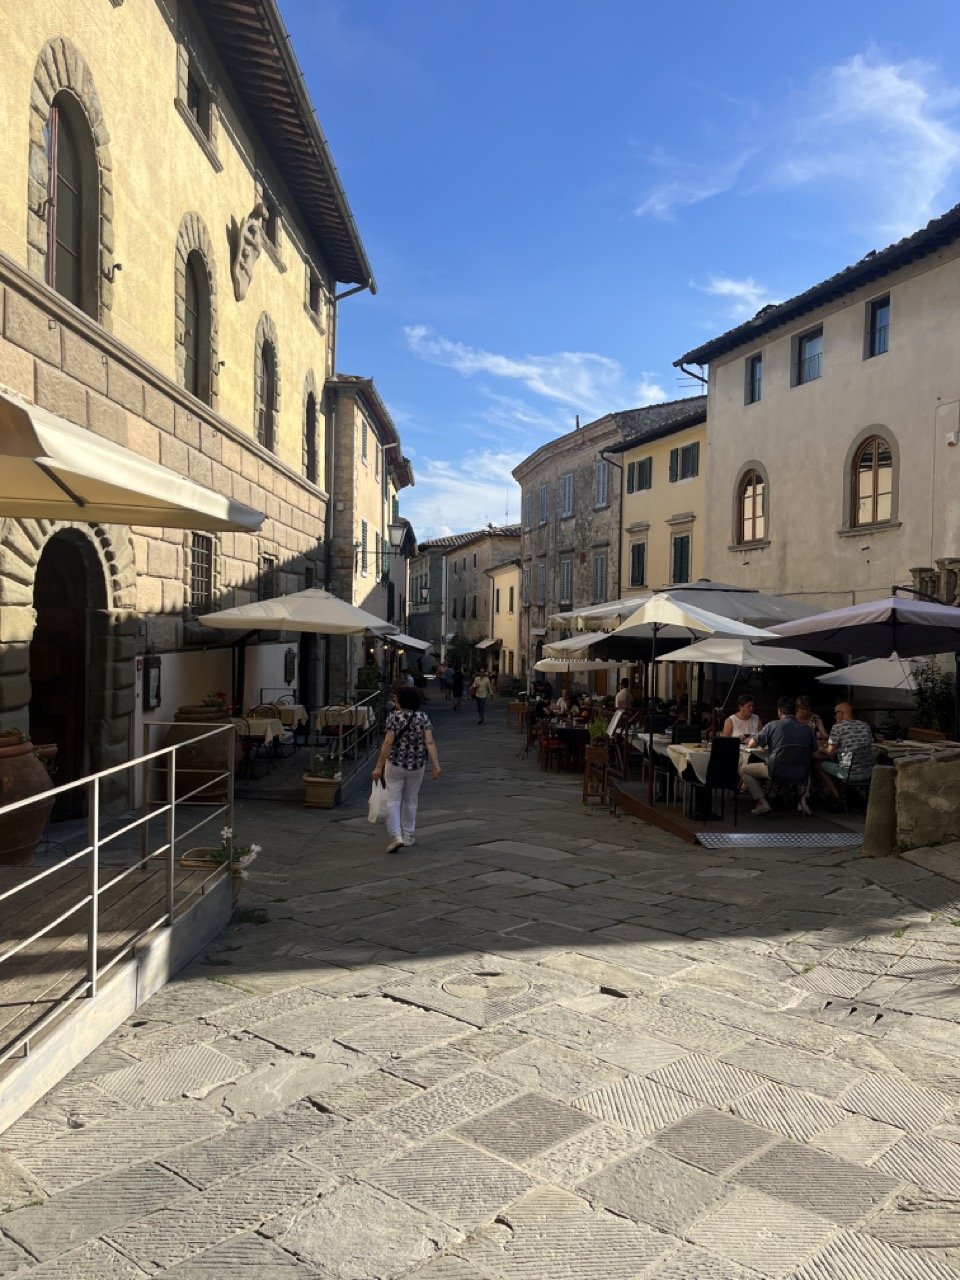 A pedestrian street lined with shops and restaurants featuring outdoor tables and umbrellas in Radda in Chianti.